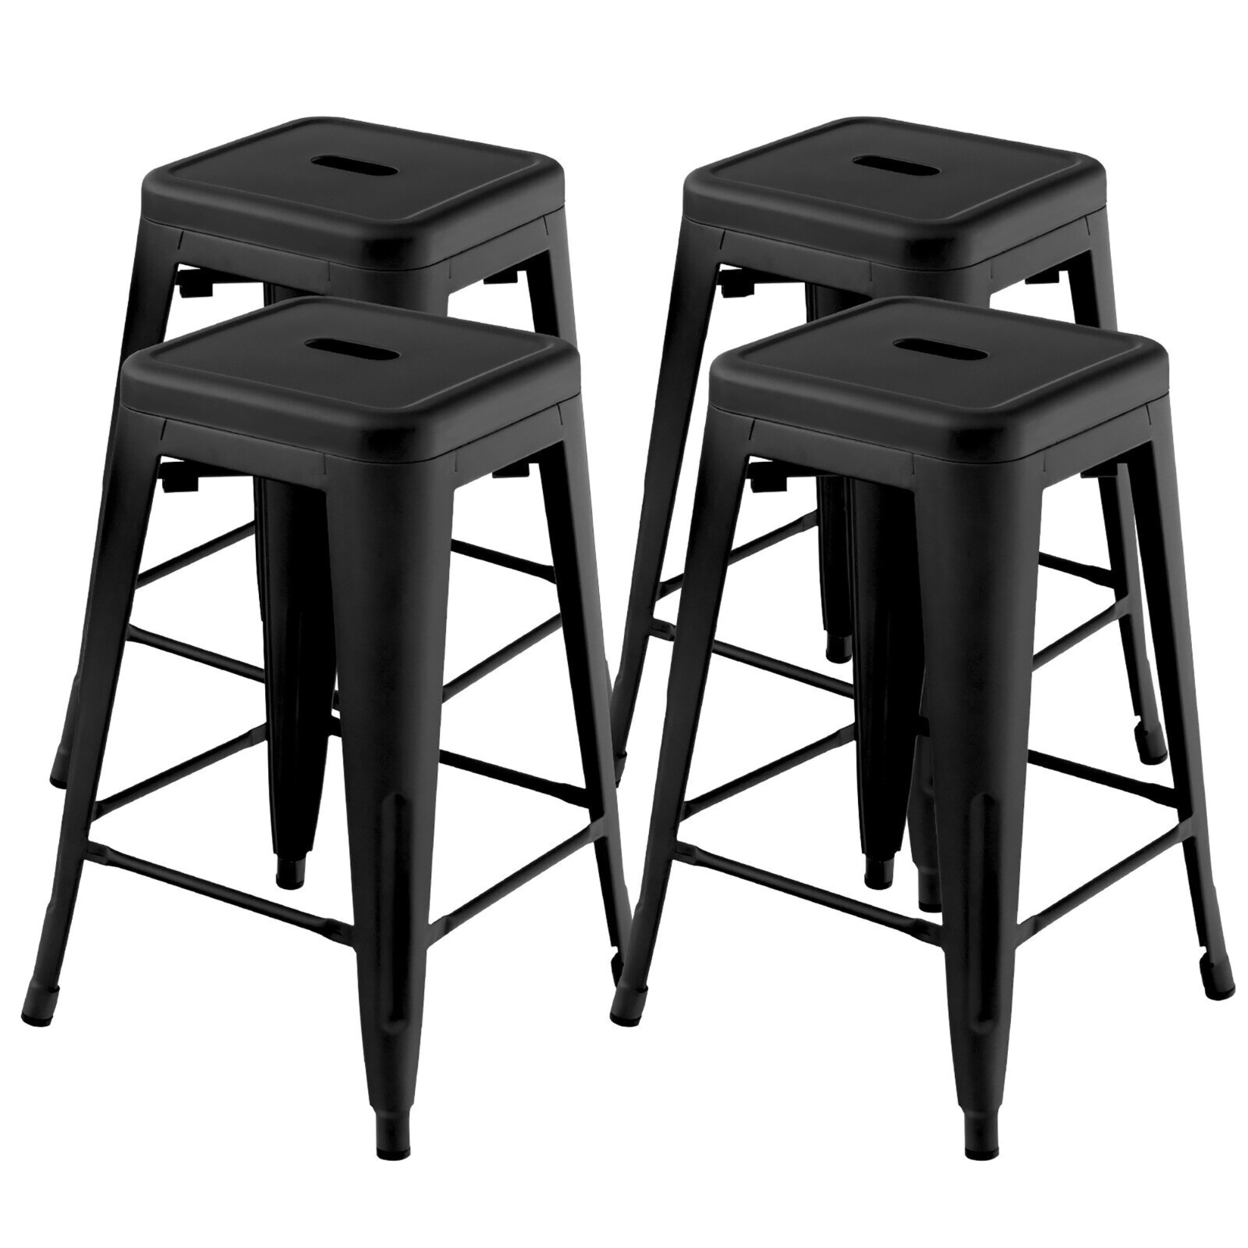 24'' Set Of 4 Barstool Counter Height Metal Bar Stool Stackable Chair - Black